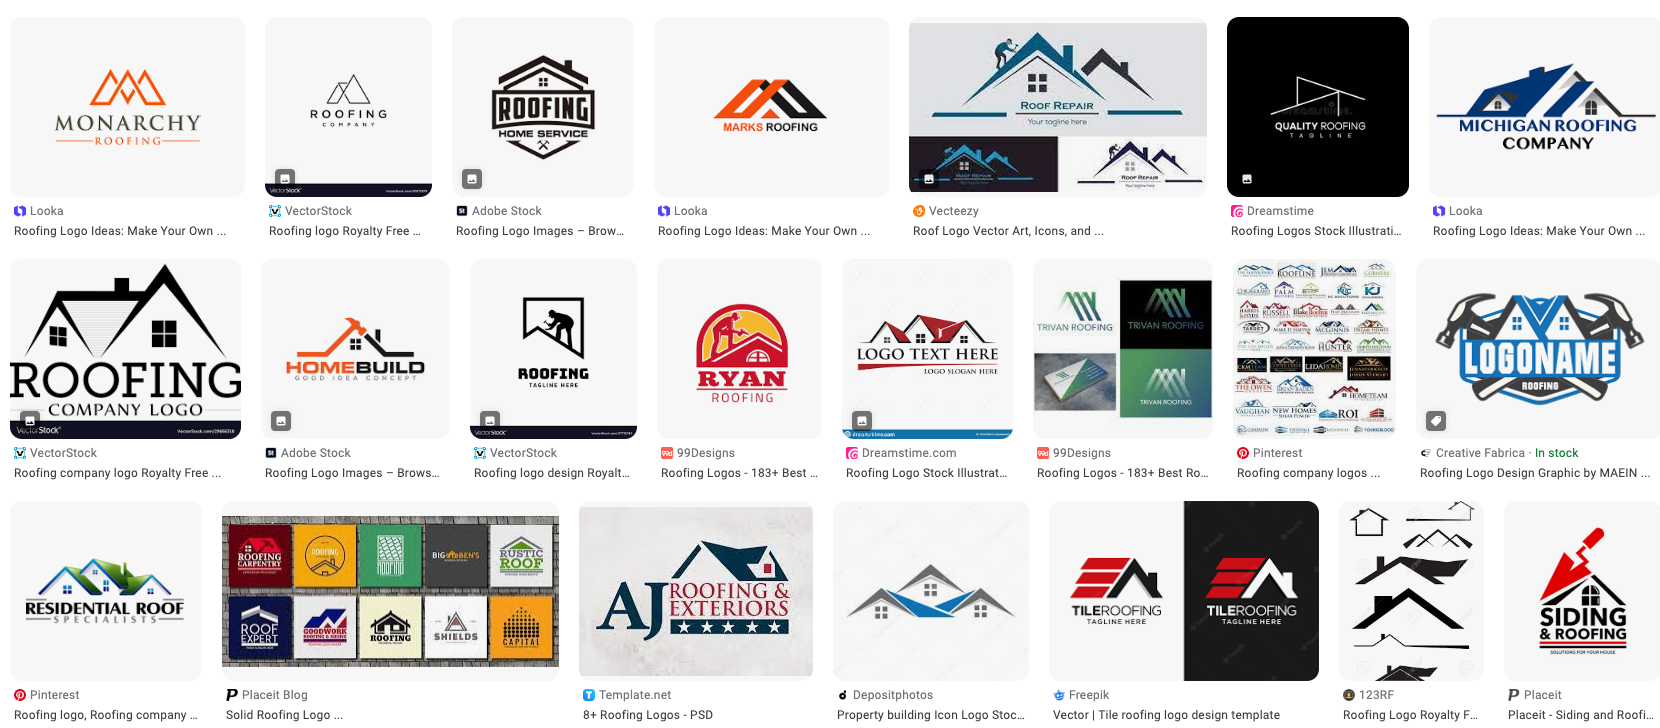 google search images of roofing company logos